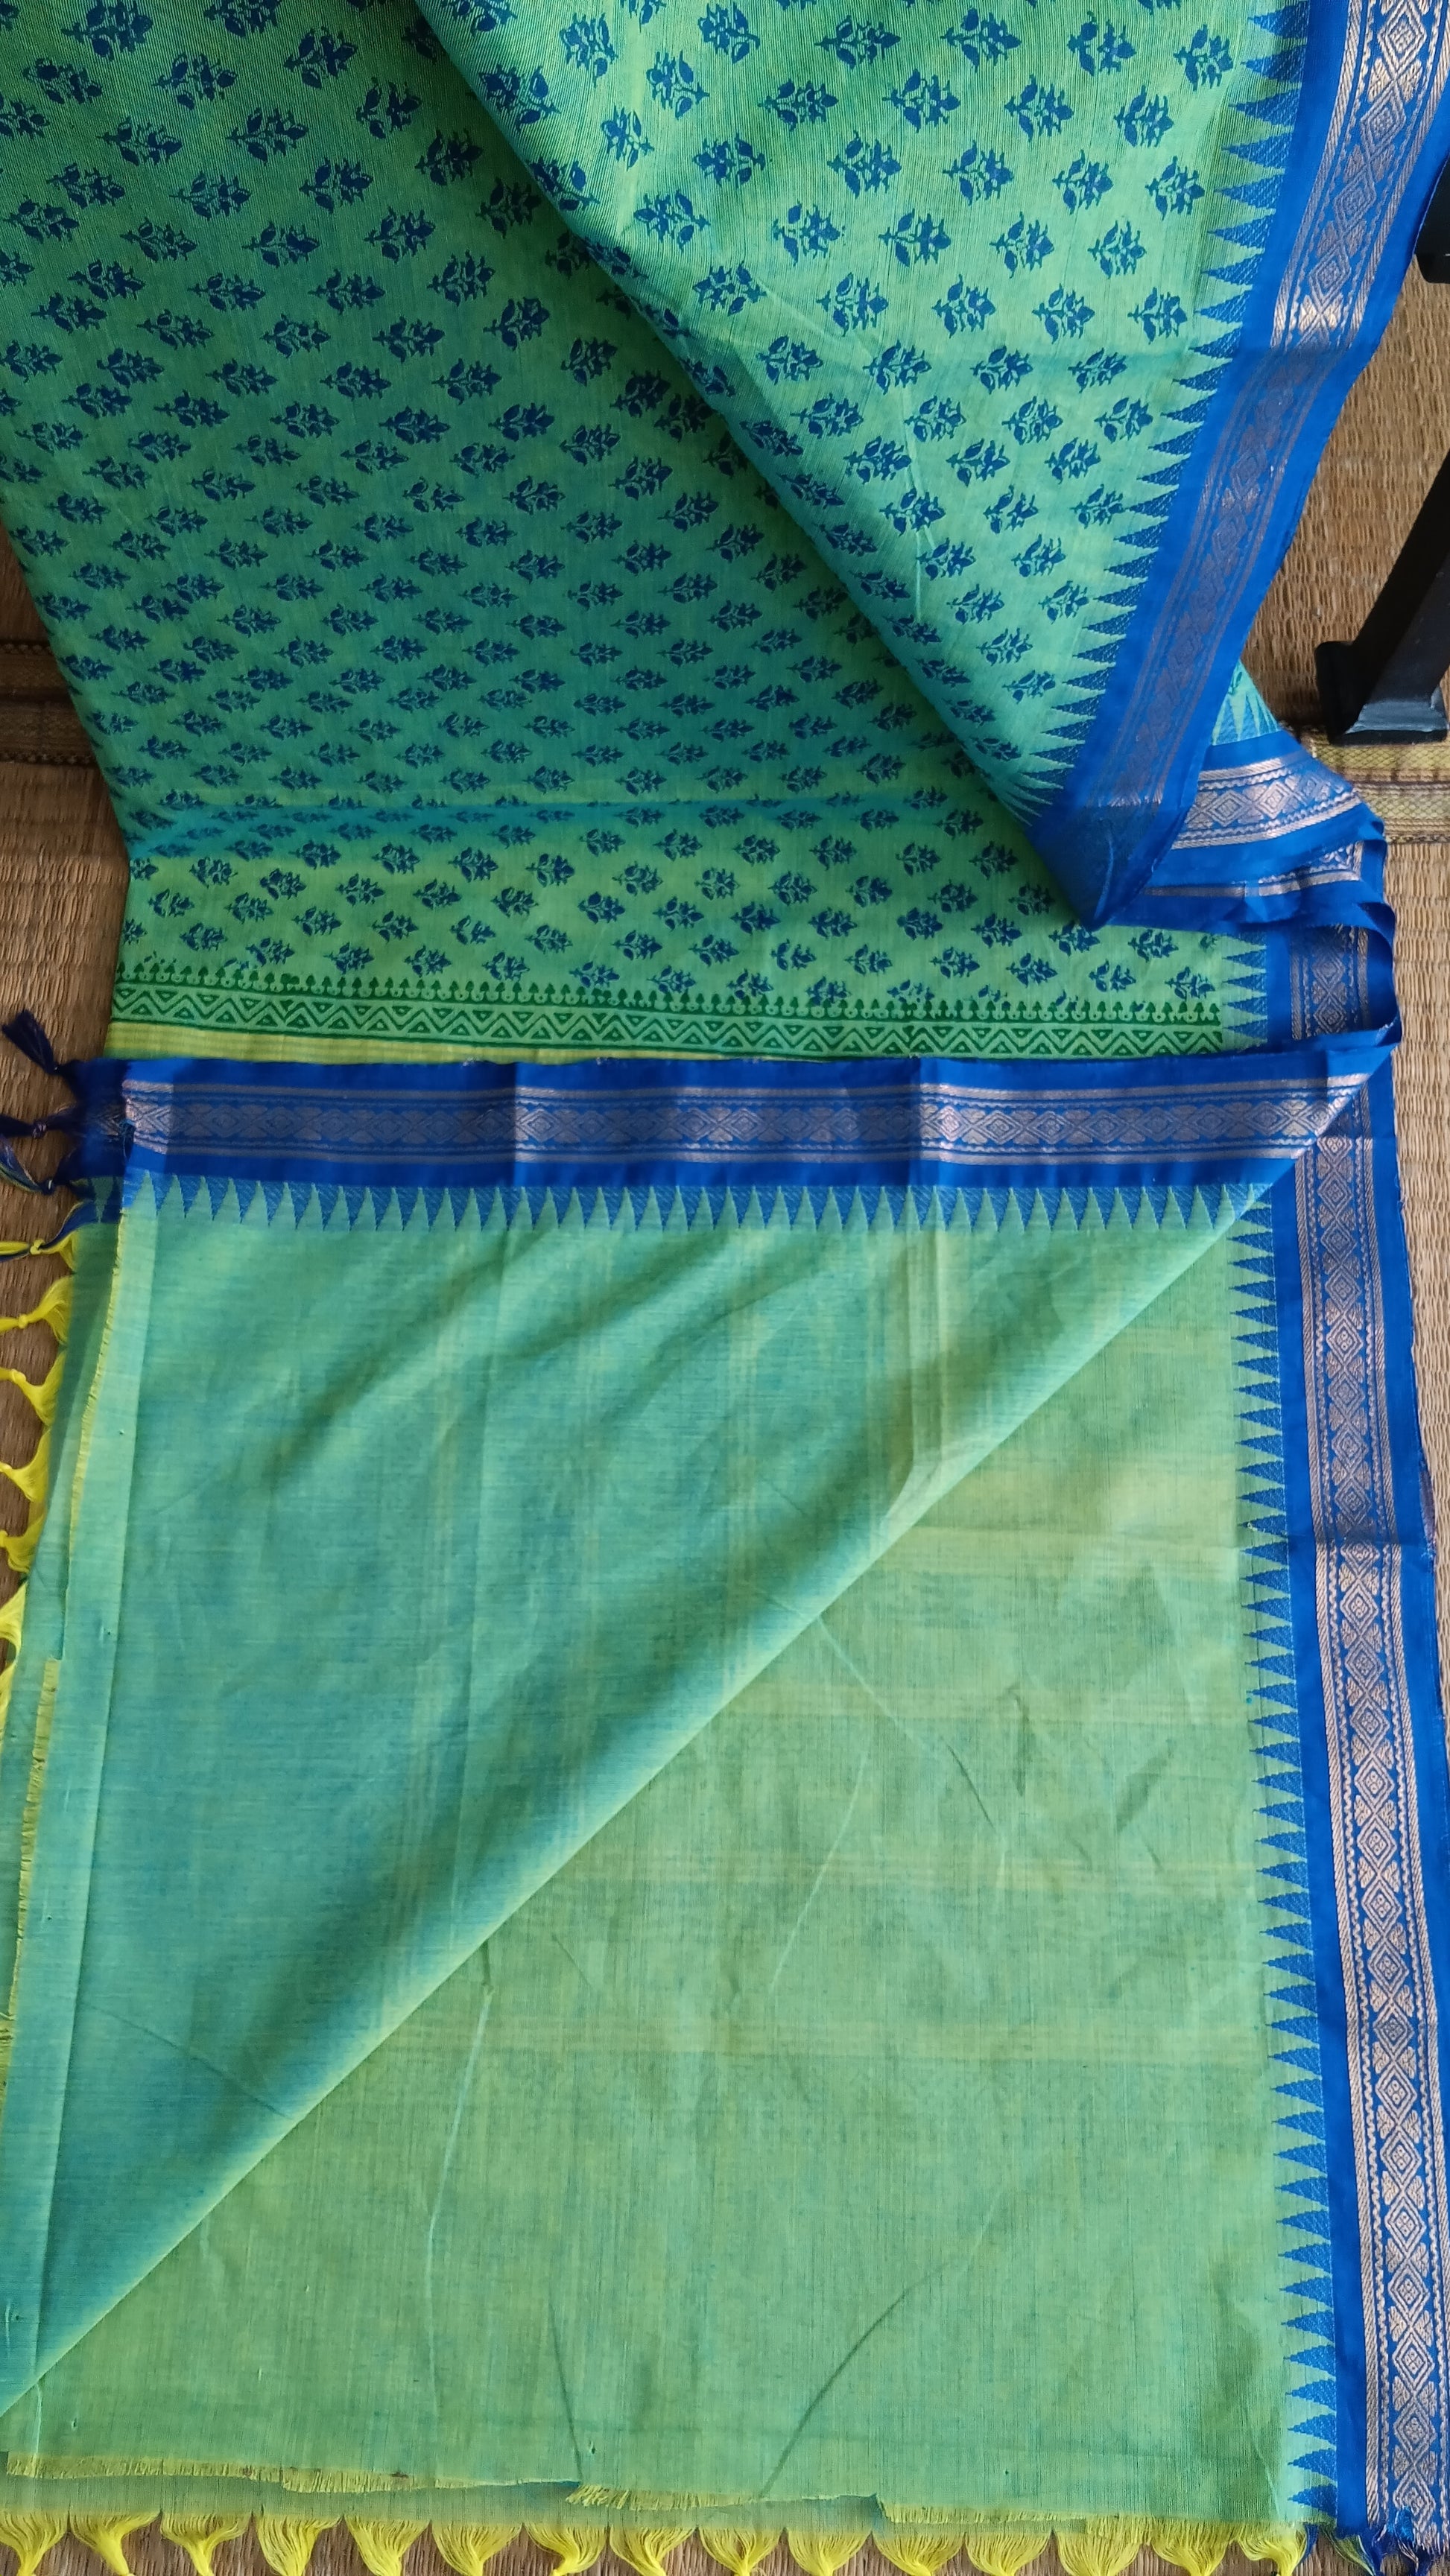 View from the top of the plain blouse of a function wear cotton saree from south india